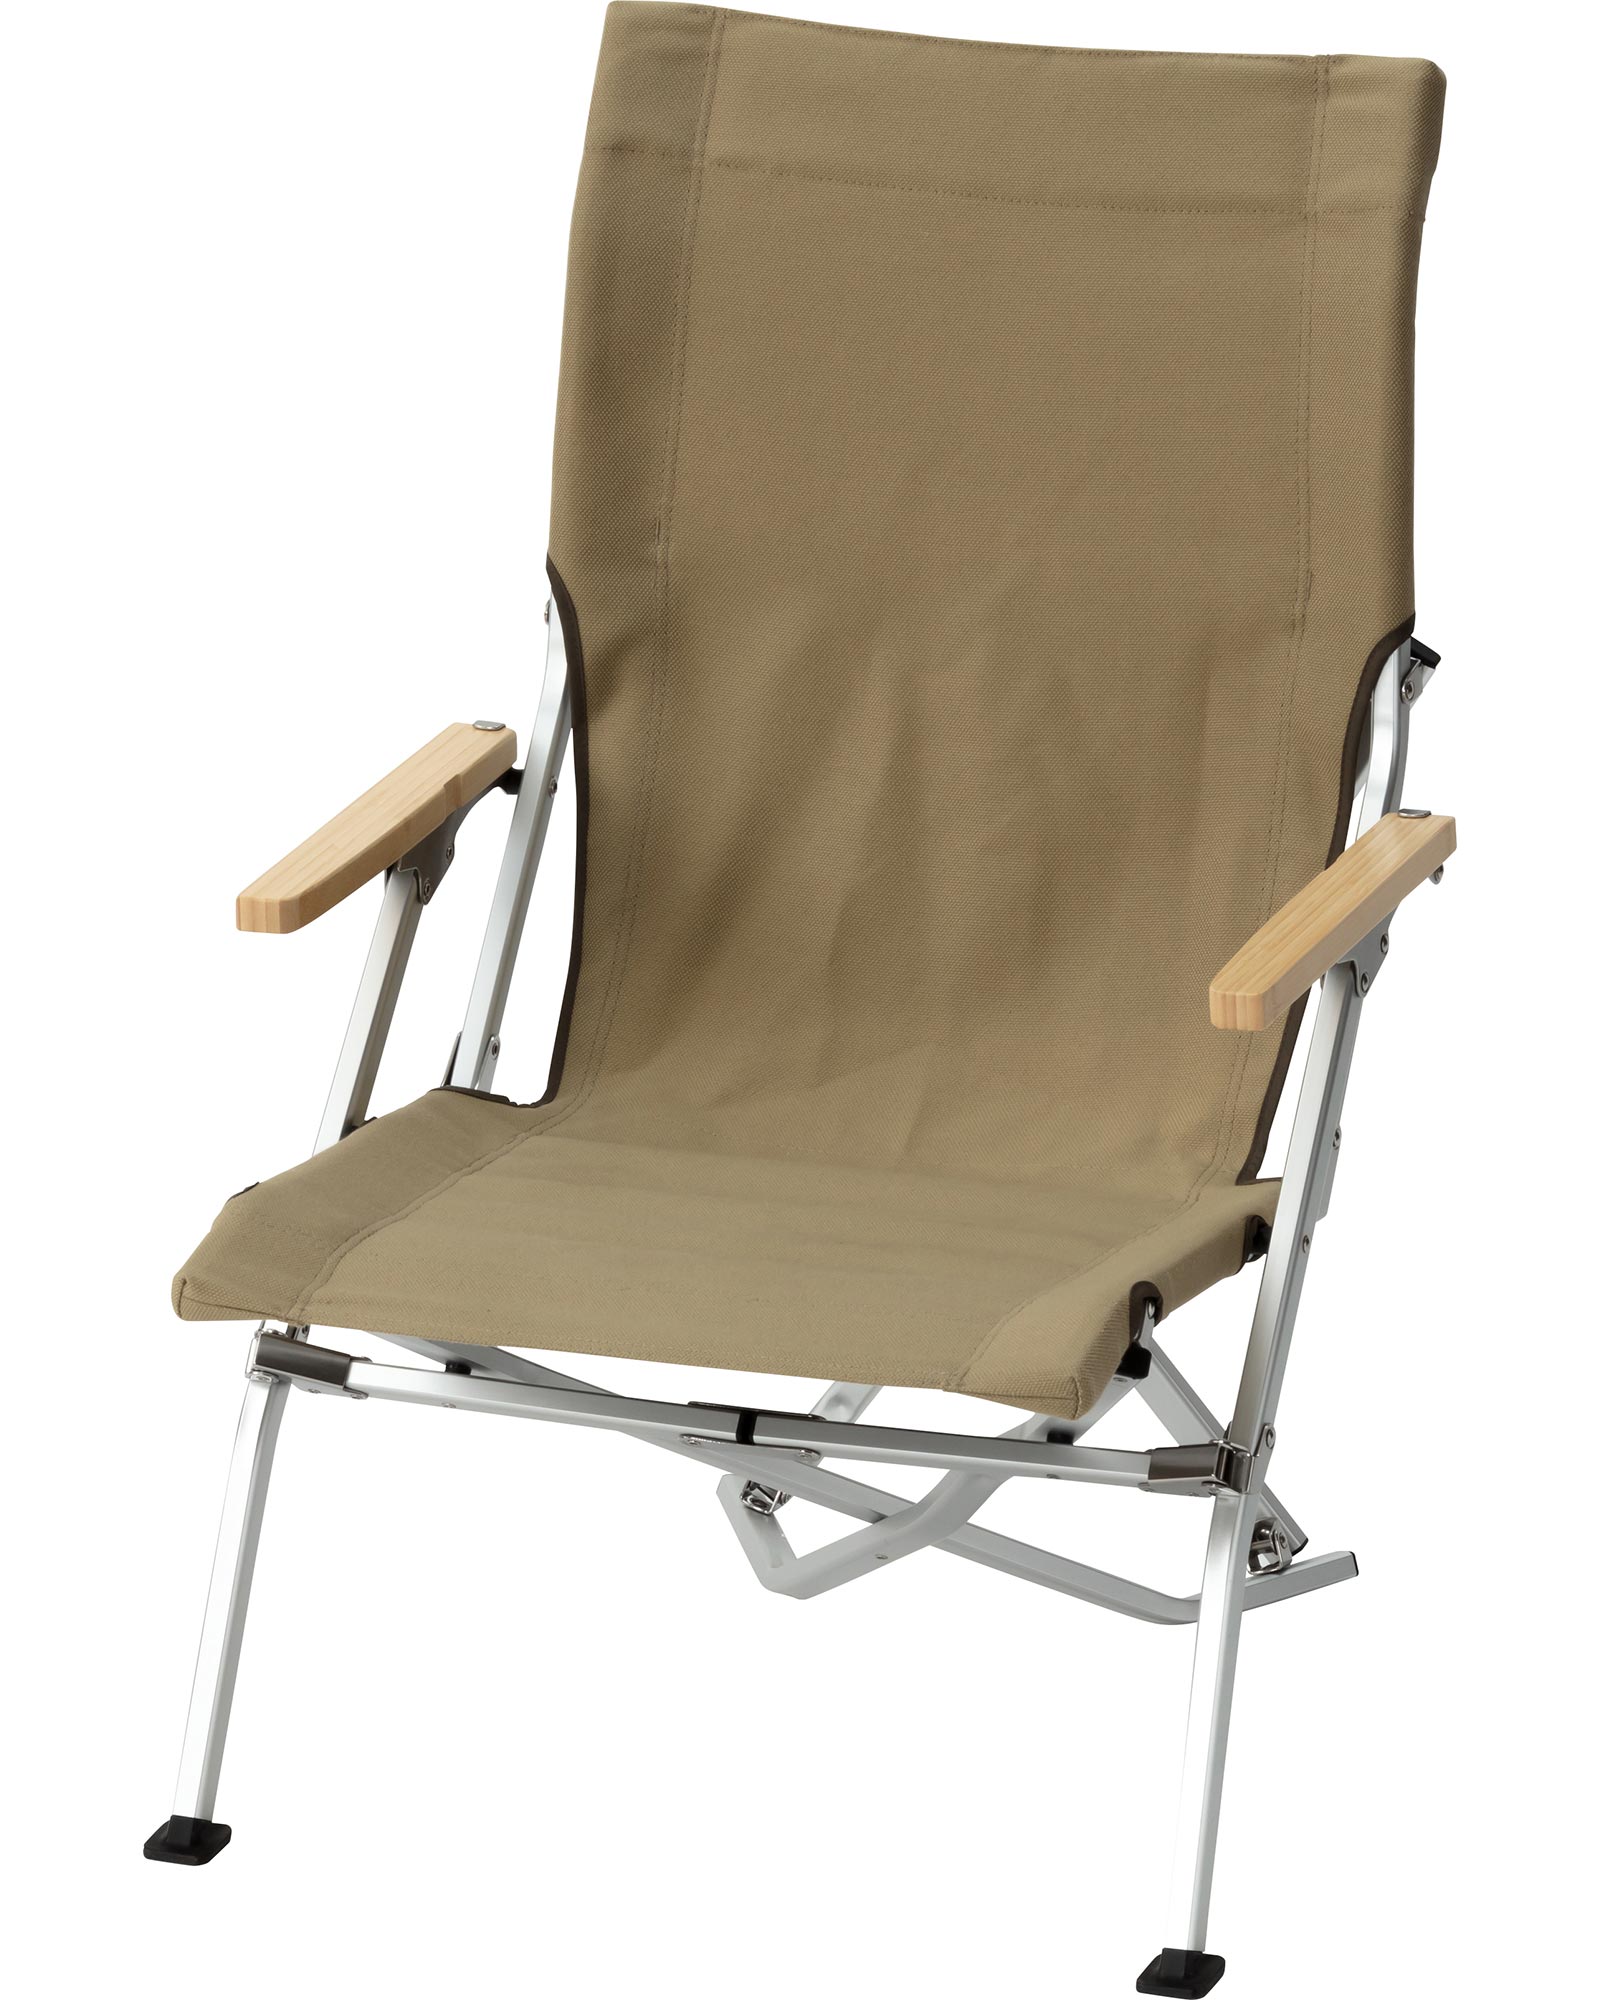 Product image of Snow Peak Low Chair